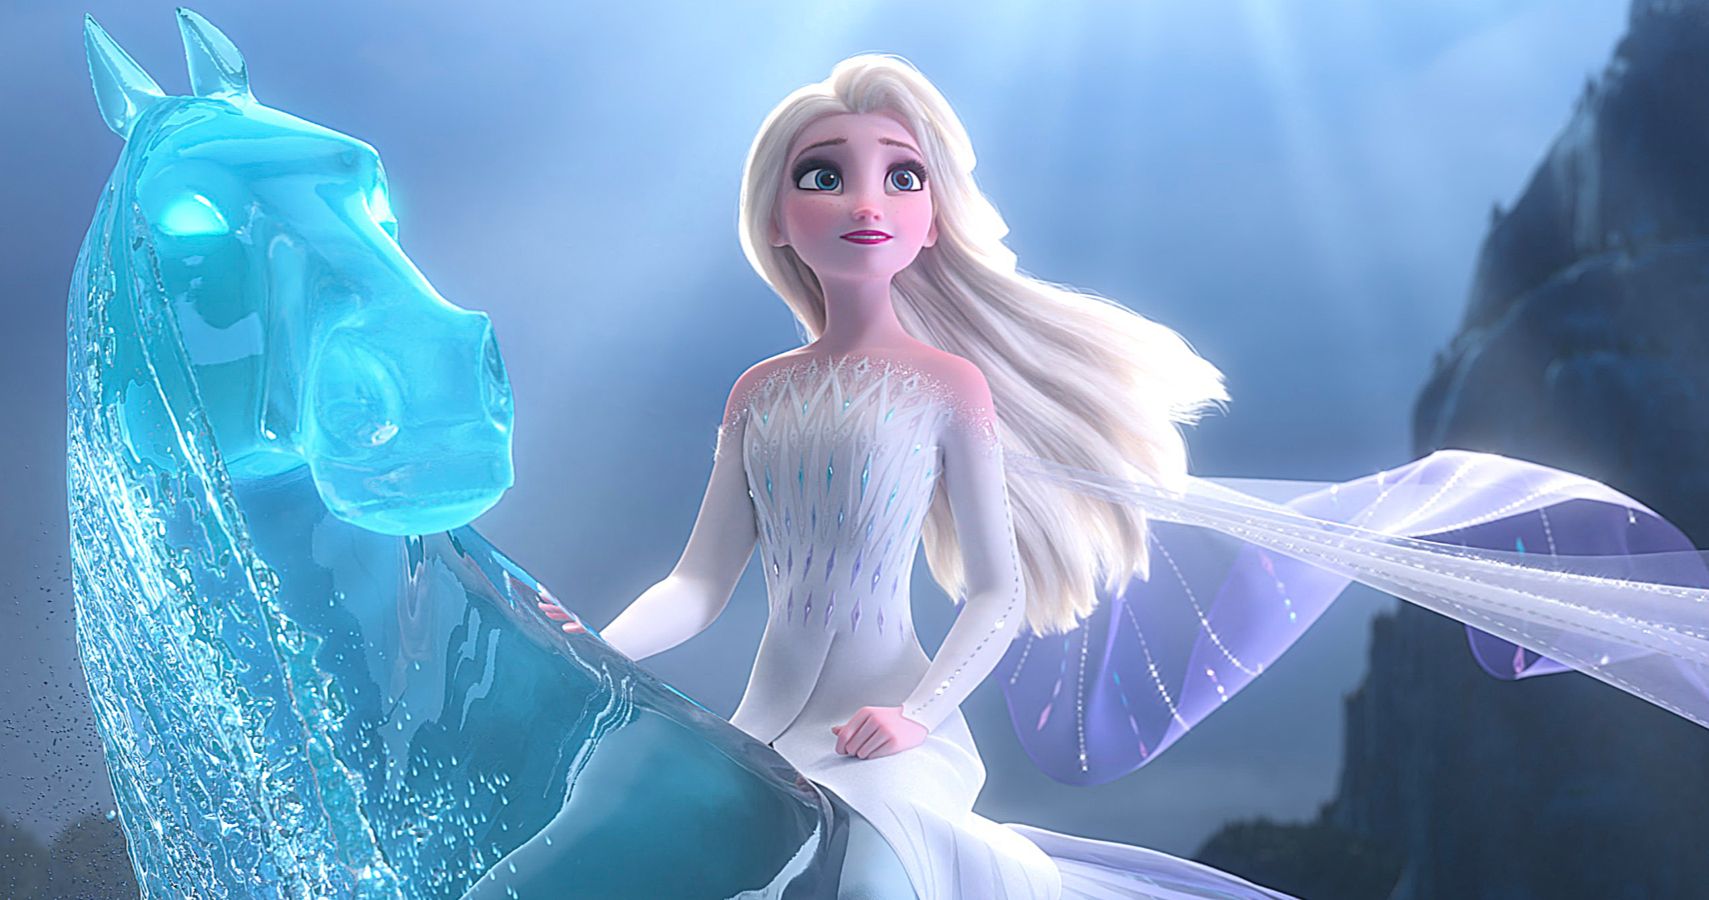 Frozen 2 Is the Highest-Grossing Animated Movie Ever with $1.3 Billion